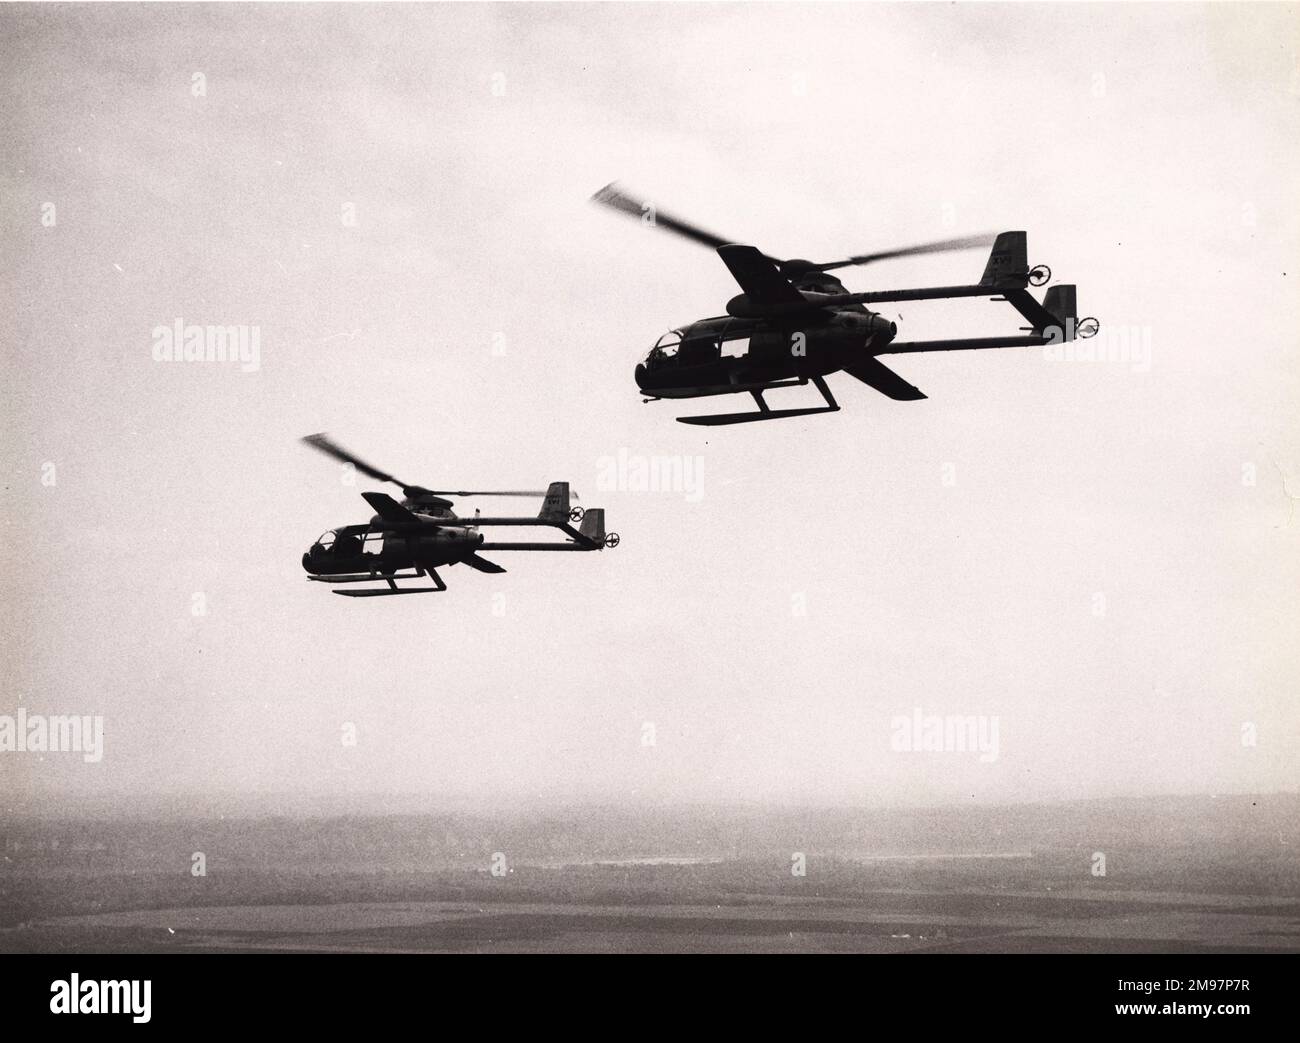 The two McDonnell XV-1s, 53-4016 and 53-4017, in flight. Stock Photo